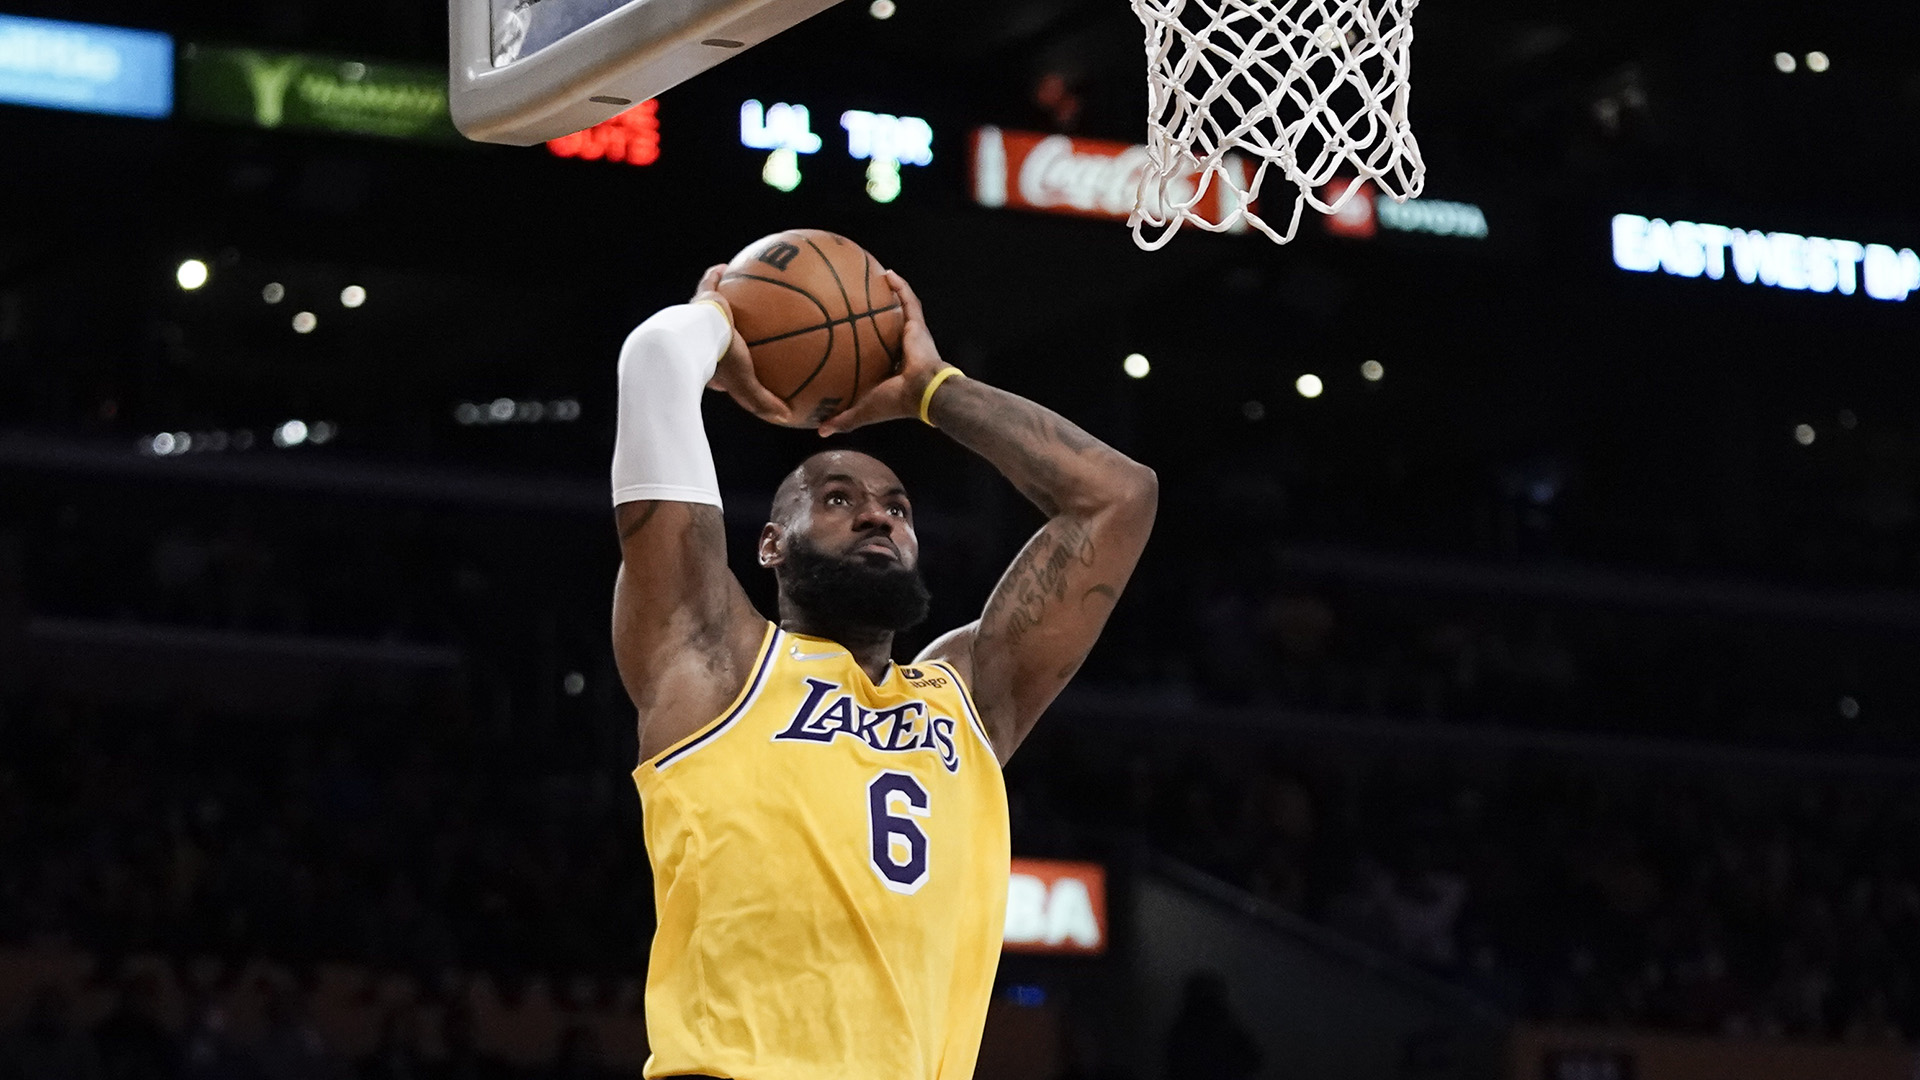 Spectrum SportsNet | Lakers, Galaxy, Sparks, Chargers - Live & On Demand